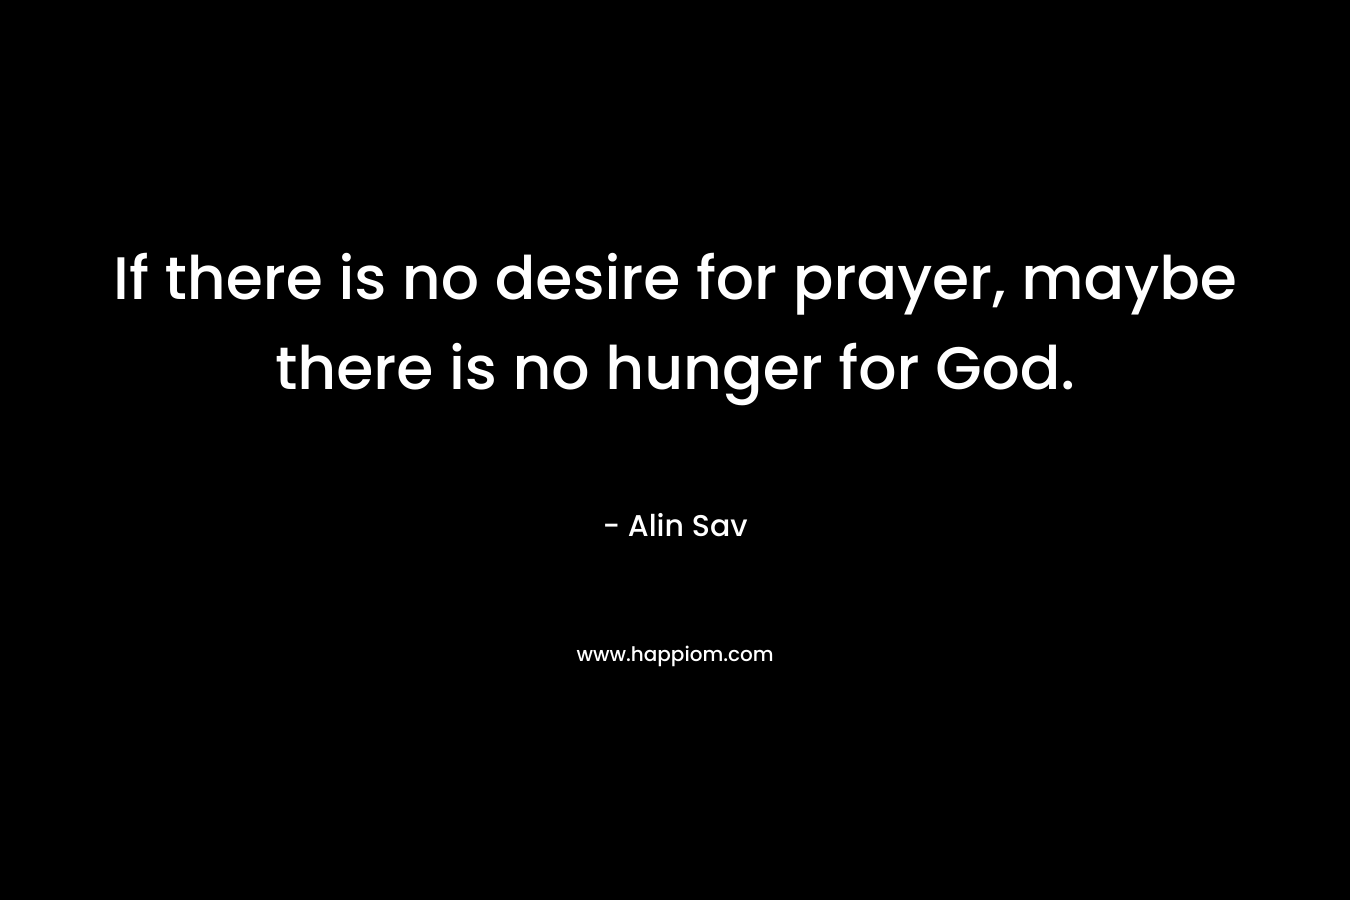 If there is no desire for prayer, maybe there is no hunger for God.